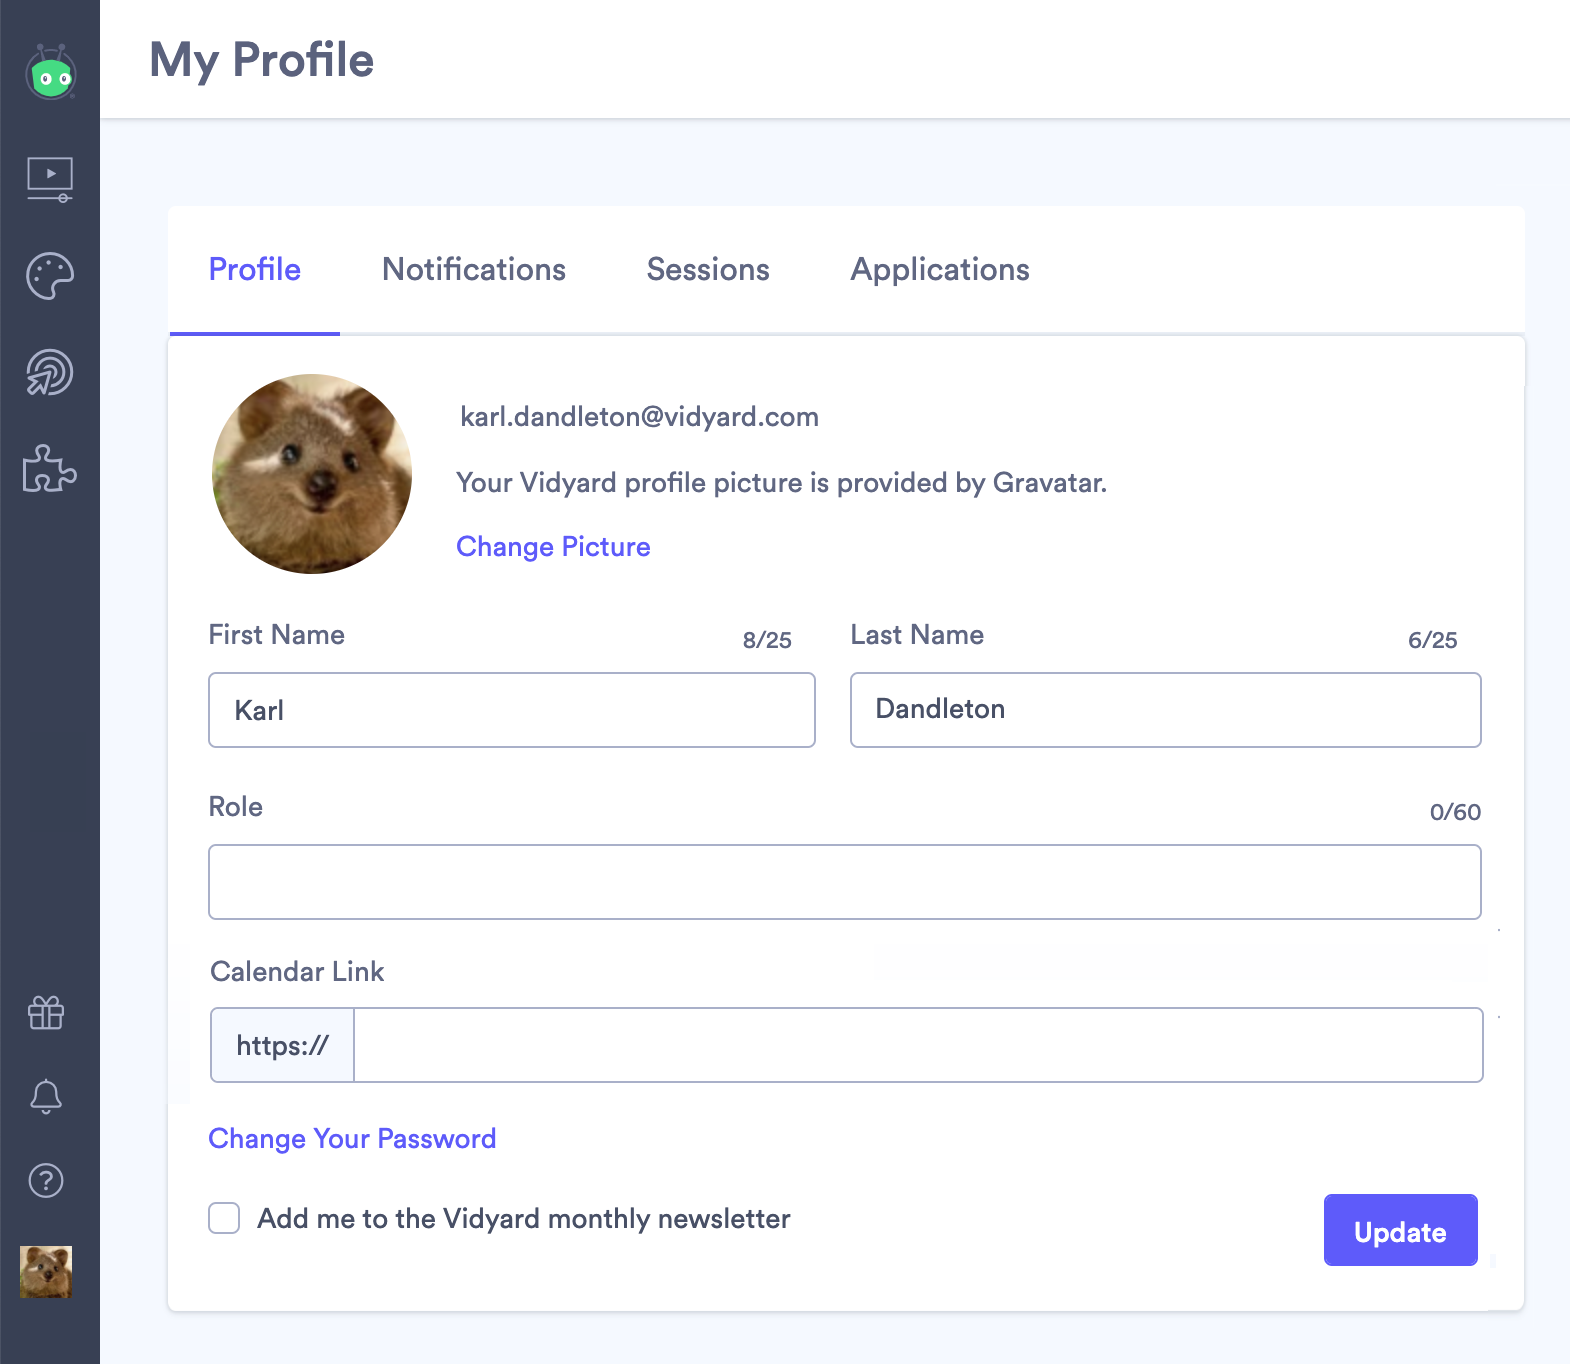 Profile information with first and last name, role, and calendar link fields available